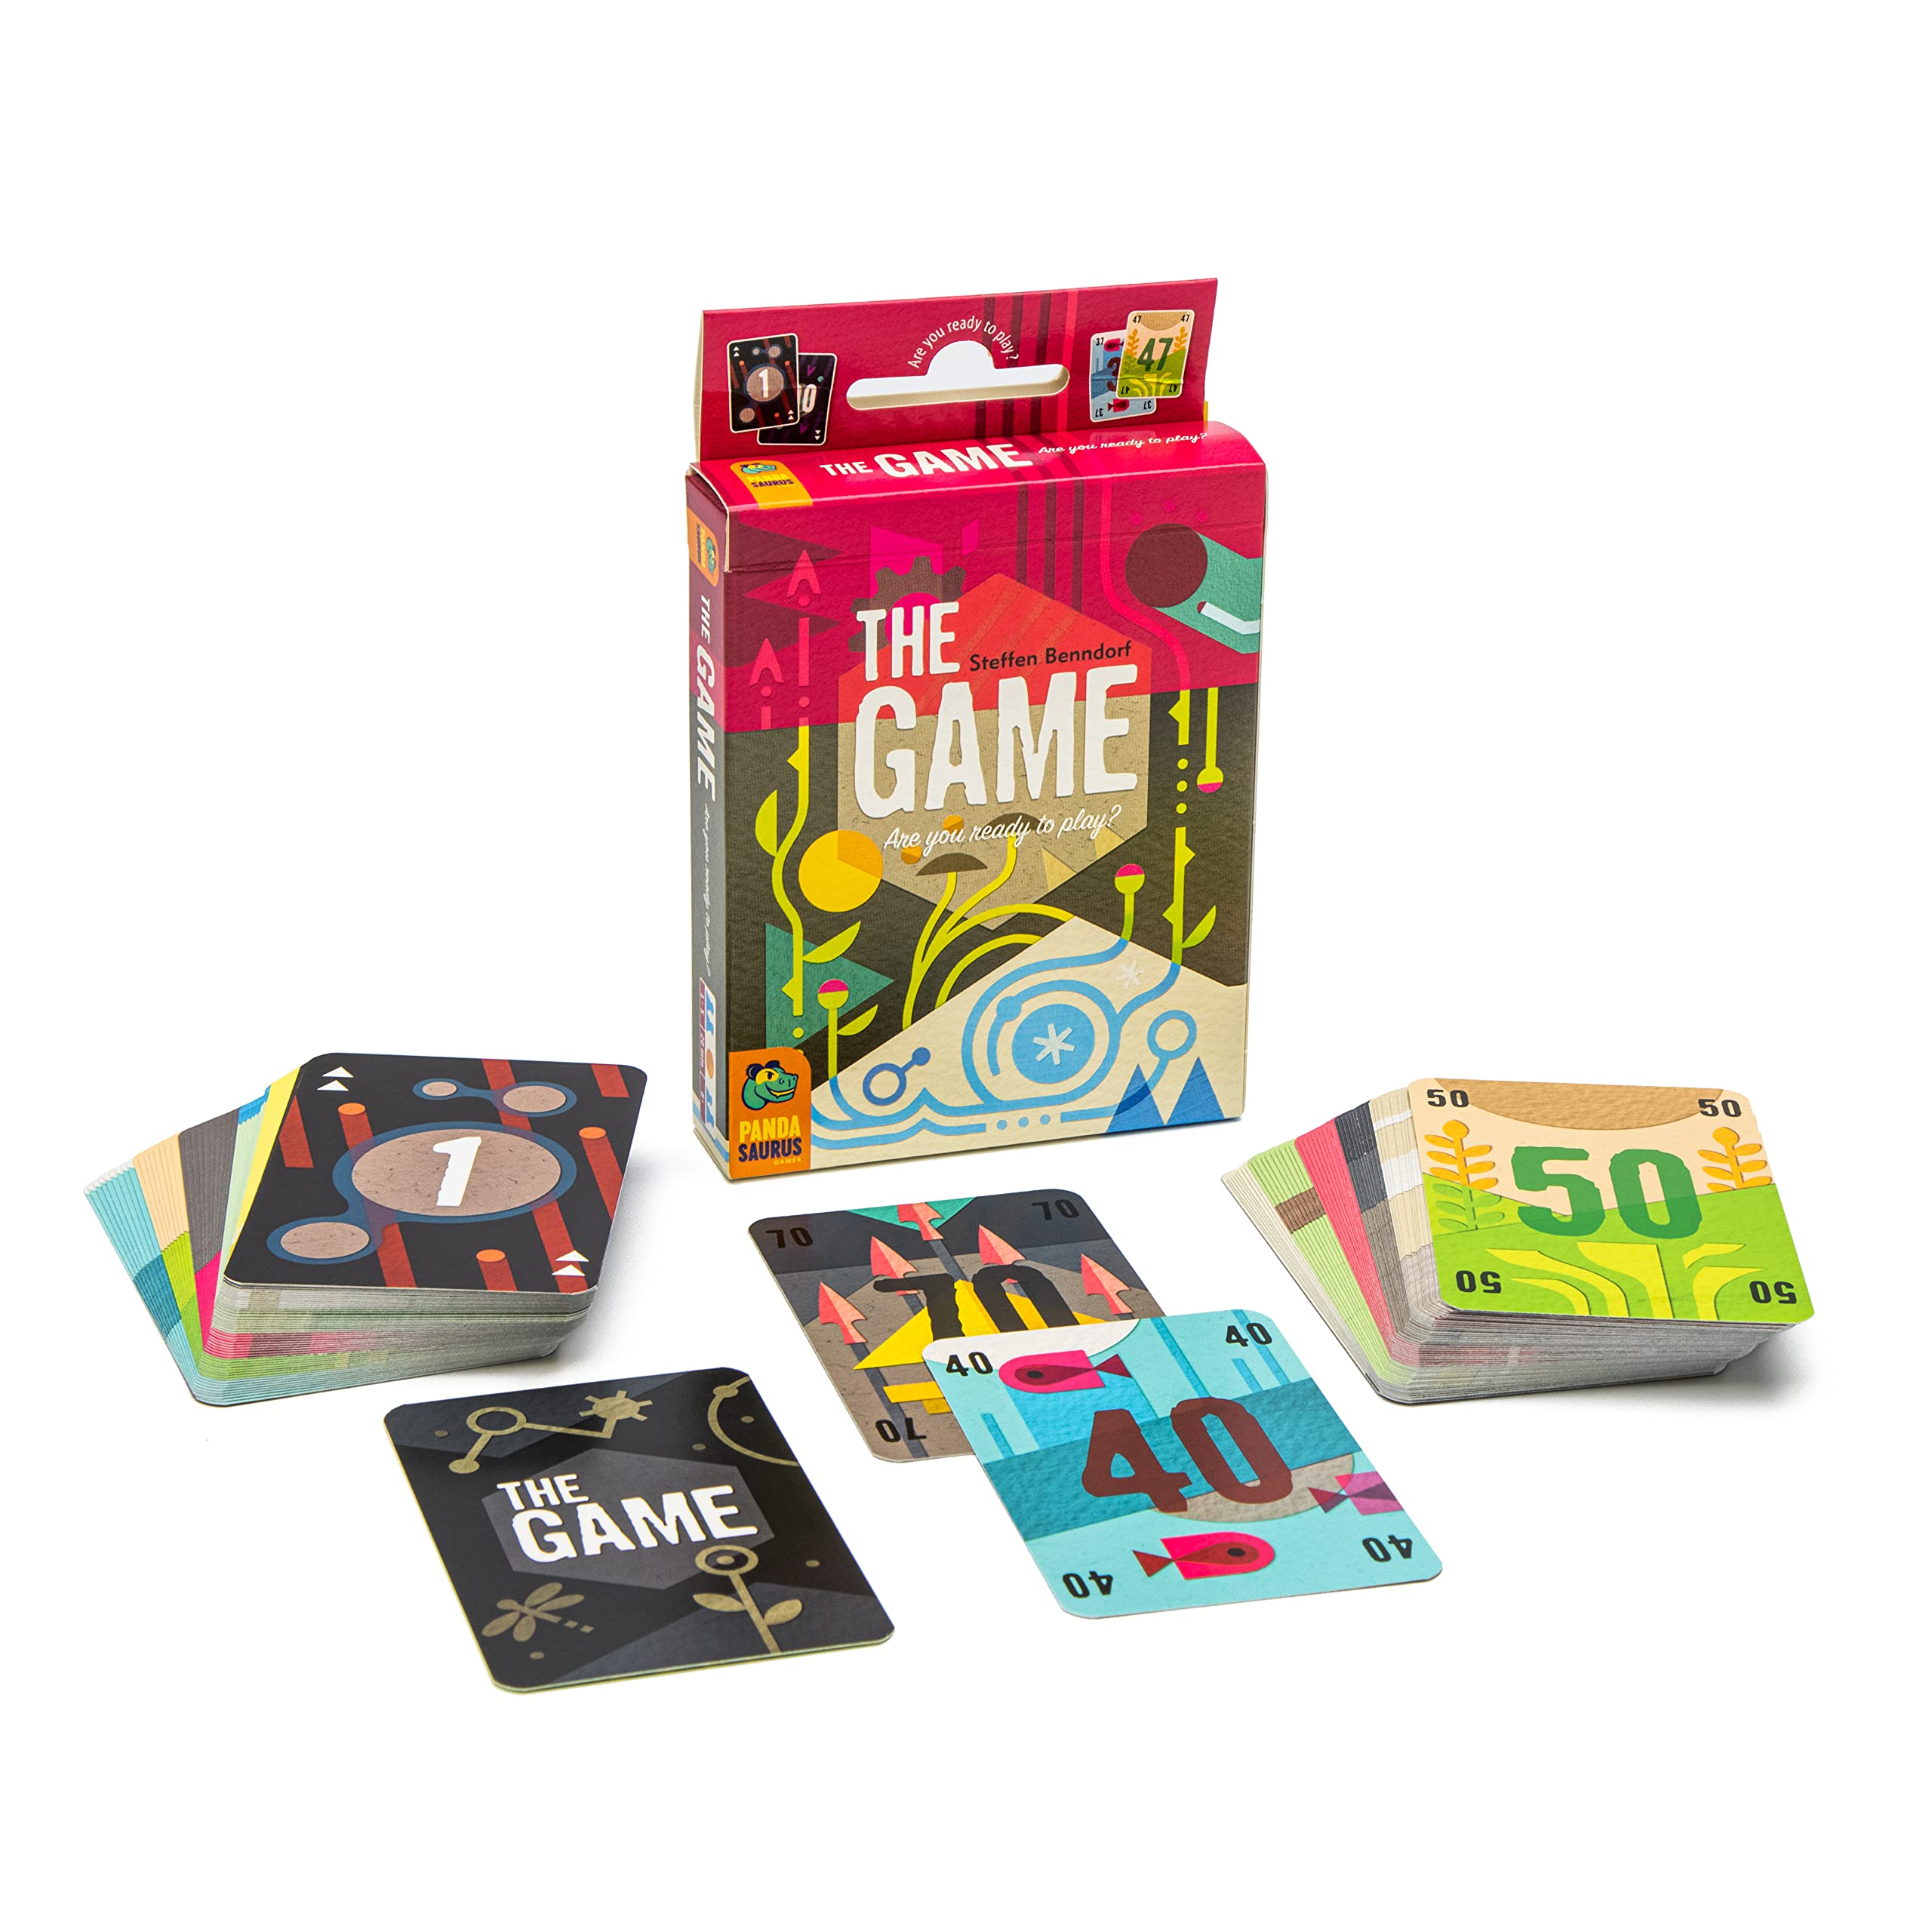 Pandasaurus Games The Game Card Game | Cooperative Strategy / Interactive / Fun Family Game for Adults and Kids | Ages 8+ | 1-5 Players | Average Playtime 20 Minutes | Made